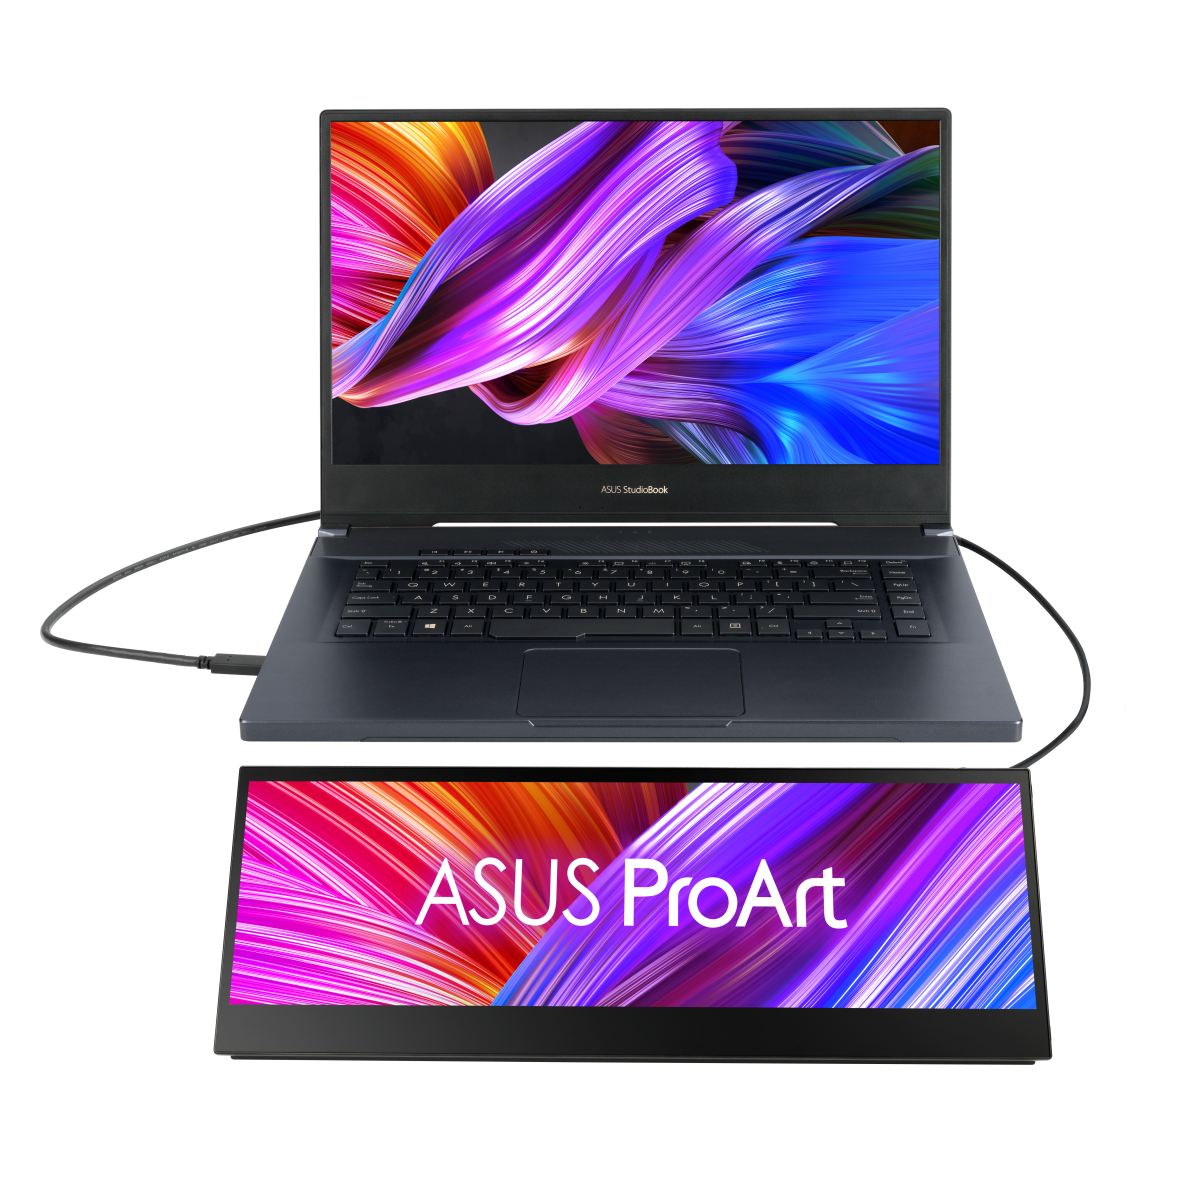 Asus proart portable monitor with laptop